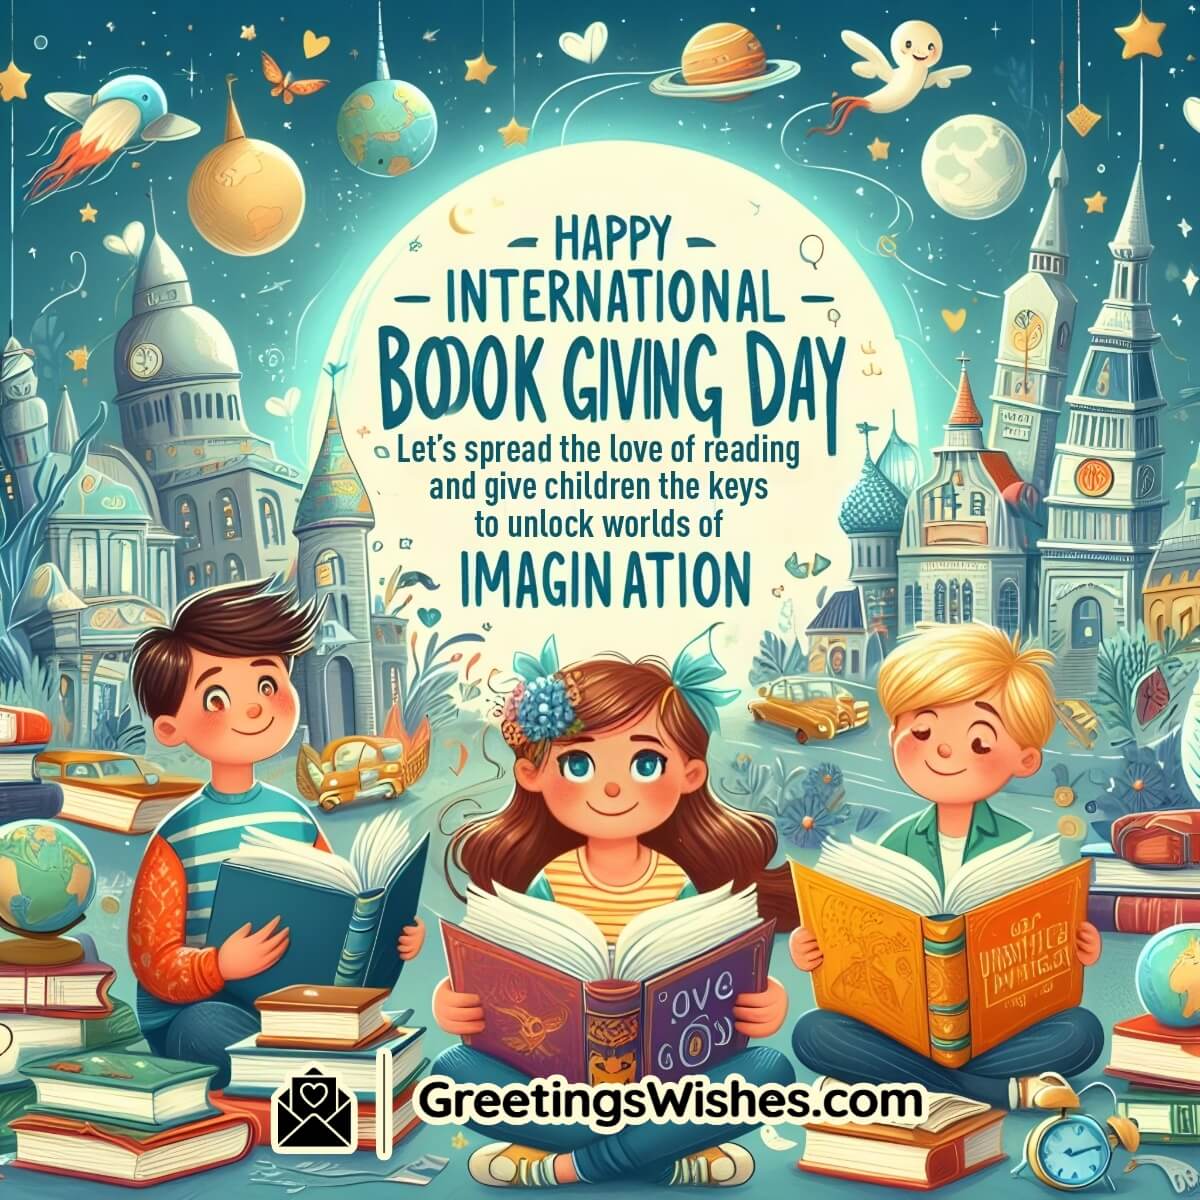 Happy International Book Giving Day Messages